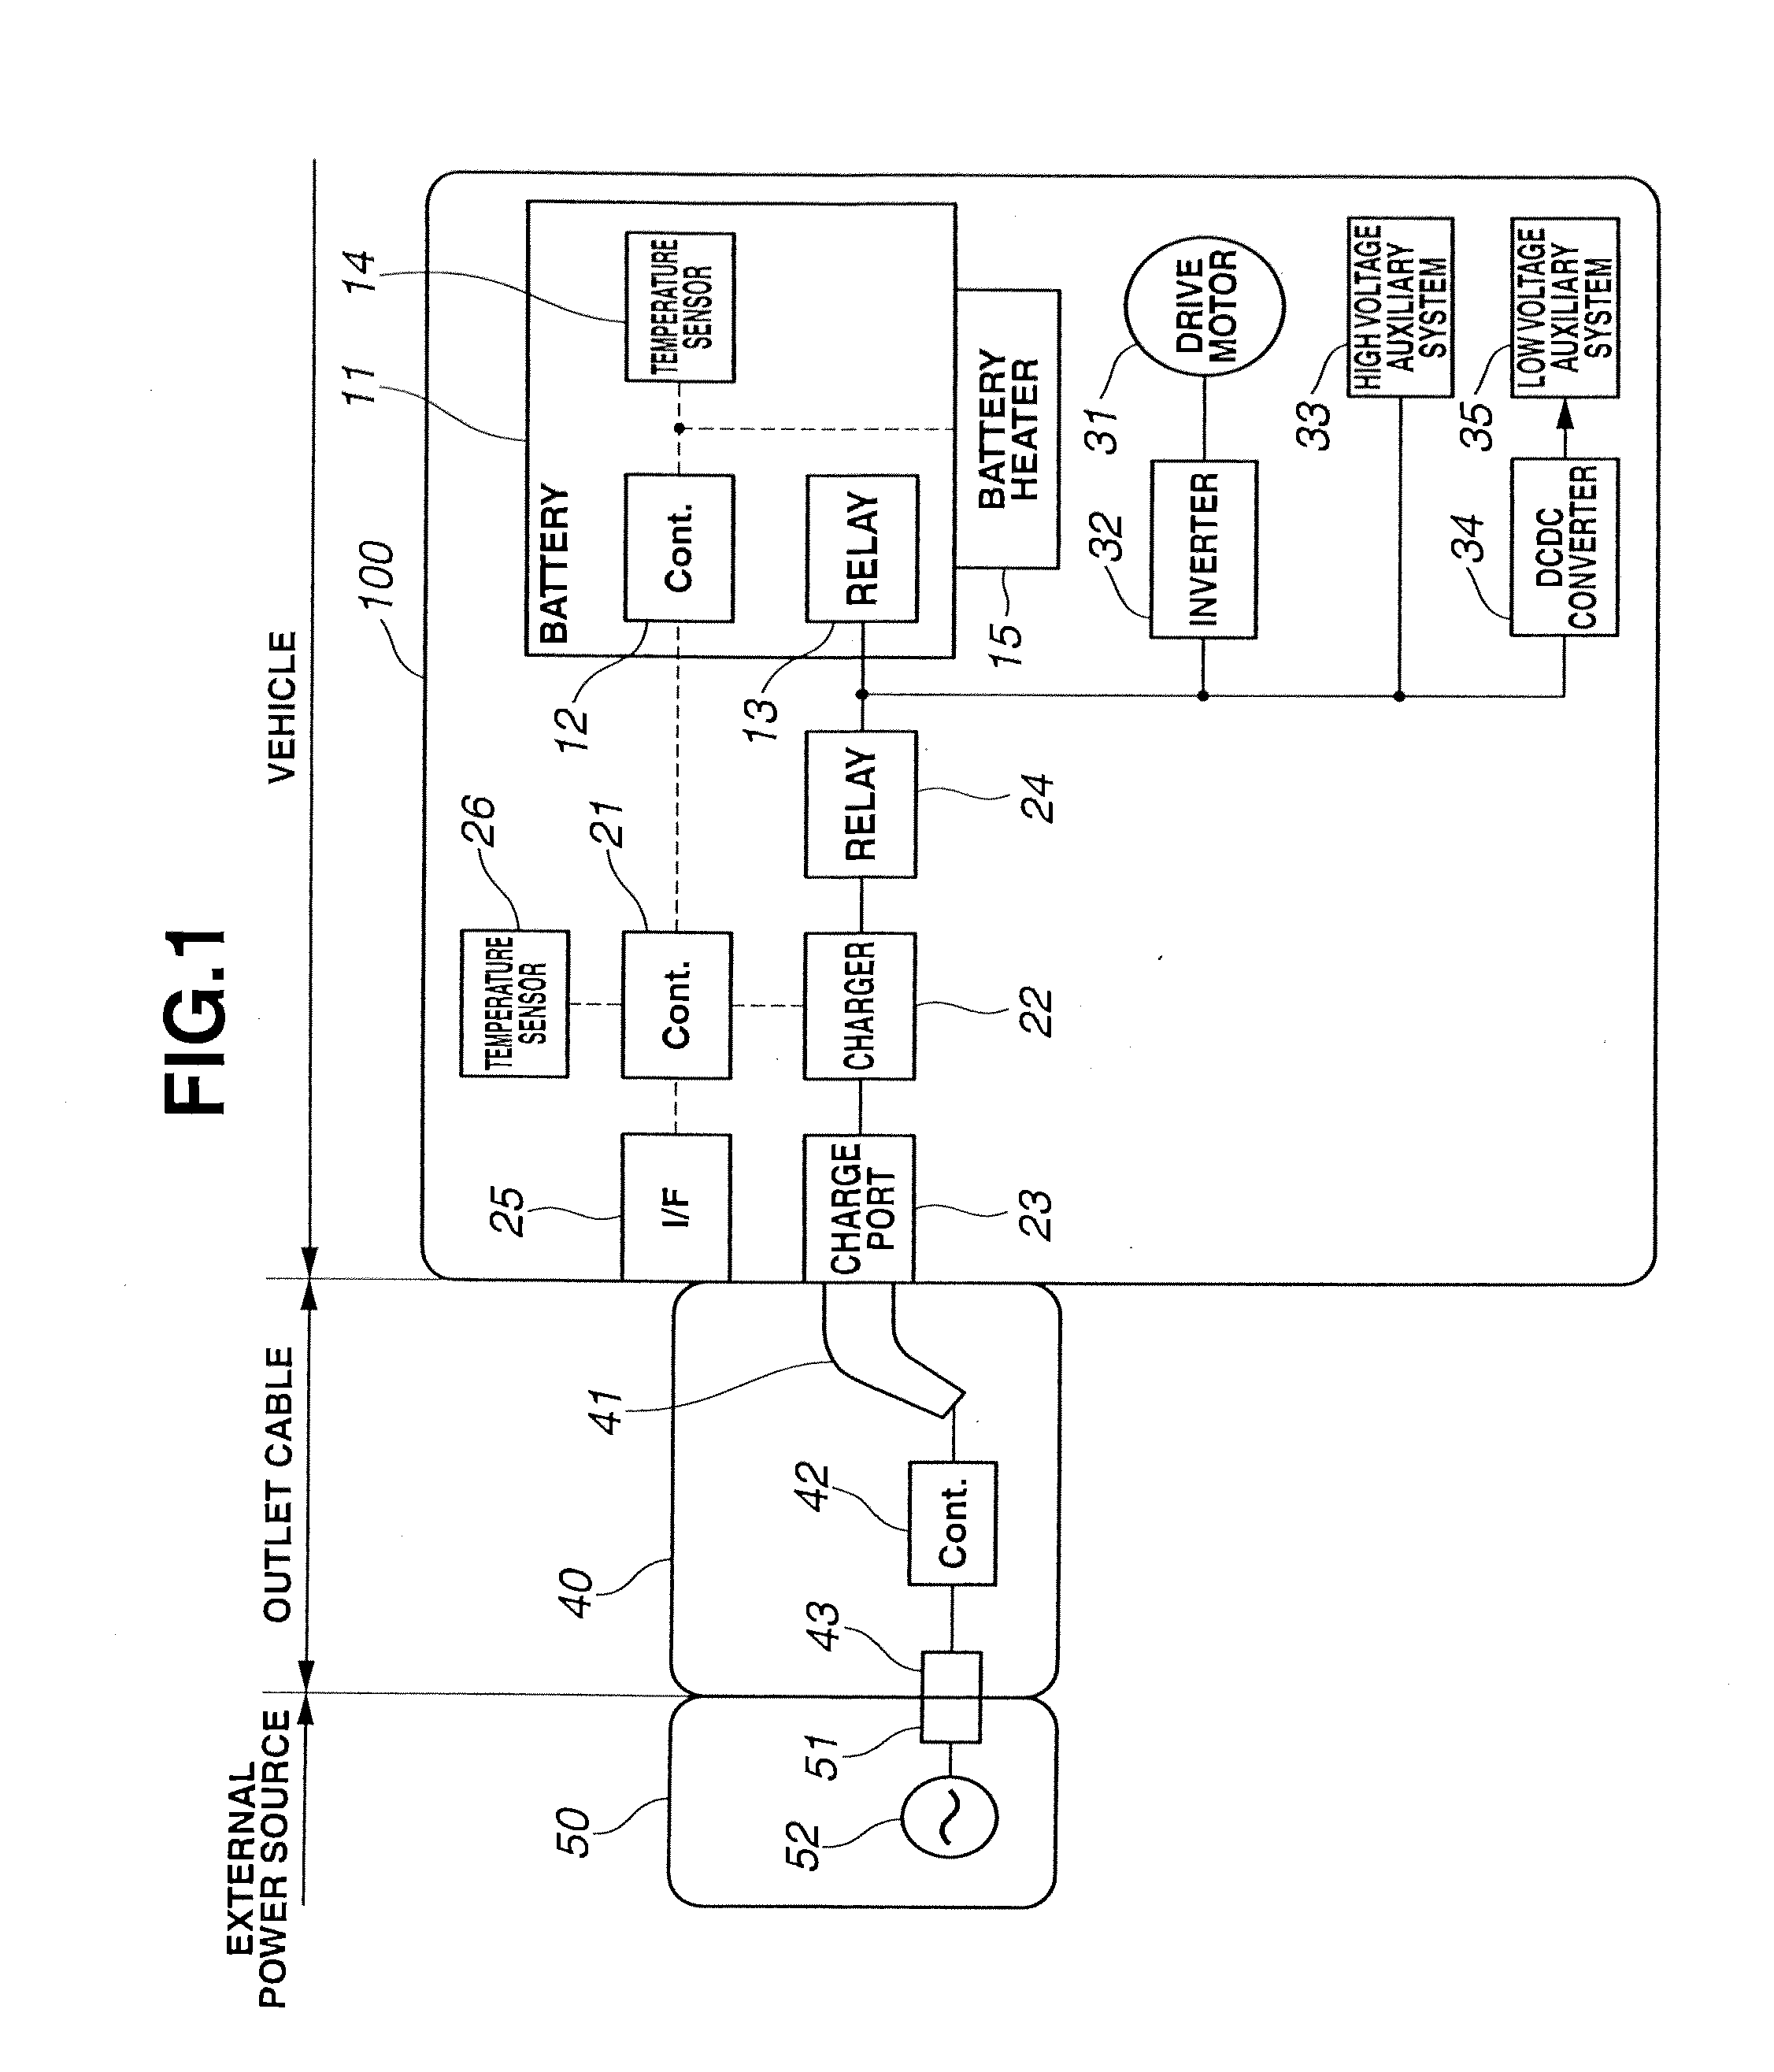 Charge control apparatus for vehicle